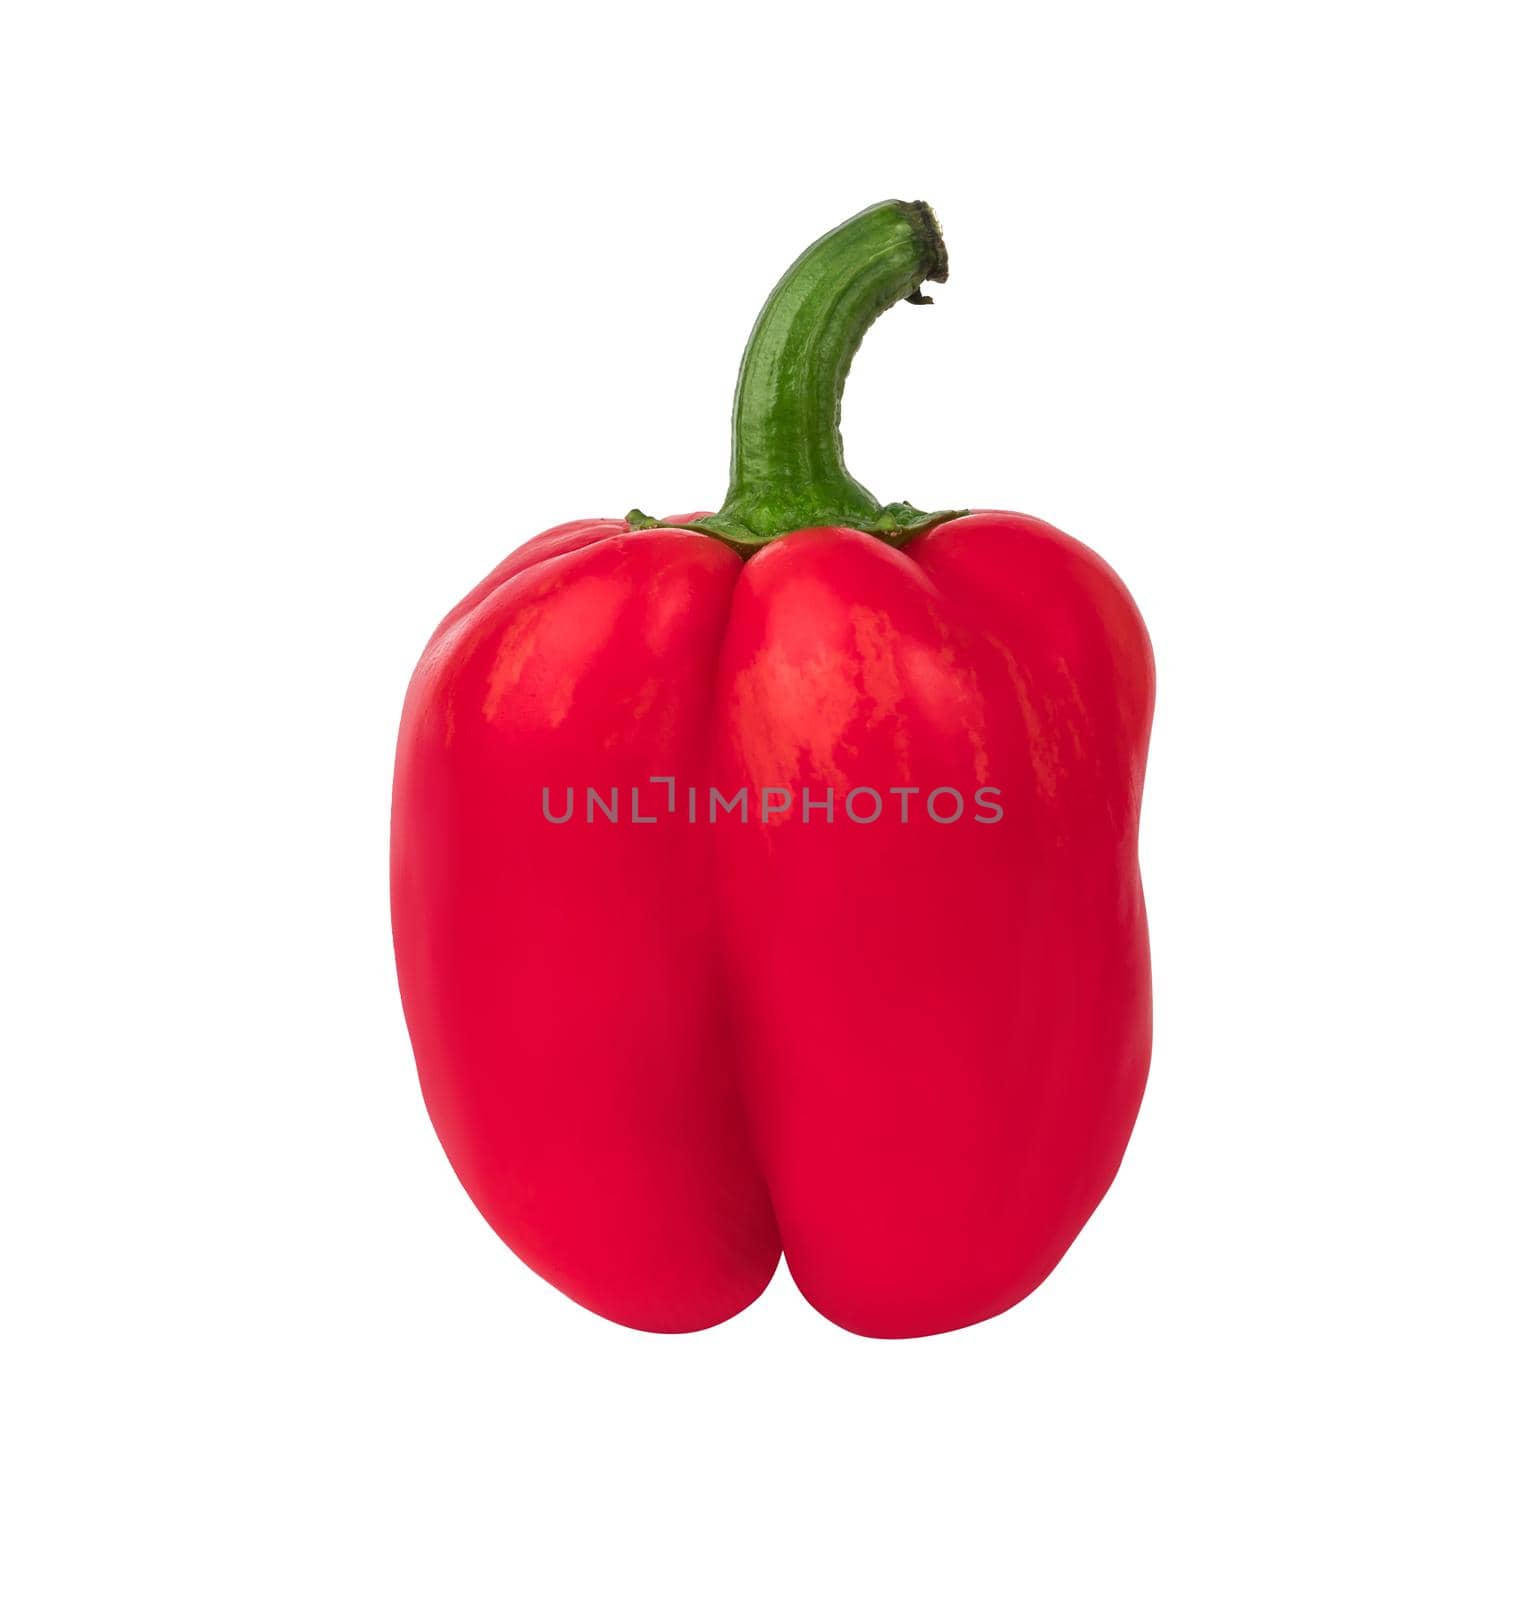 One whole bell pepper, red in color, on a white background